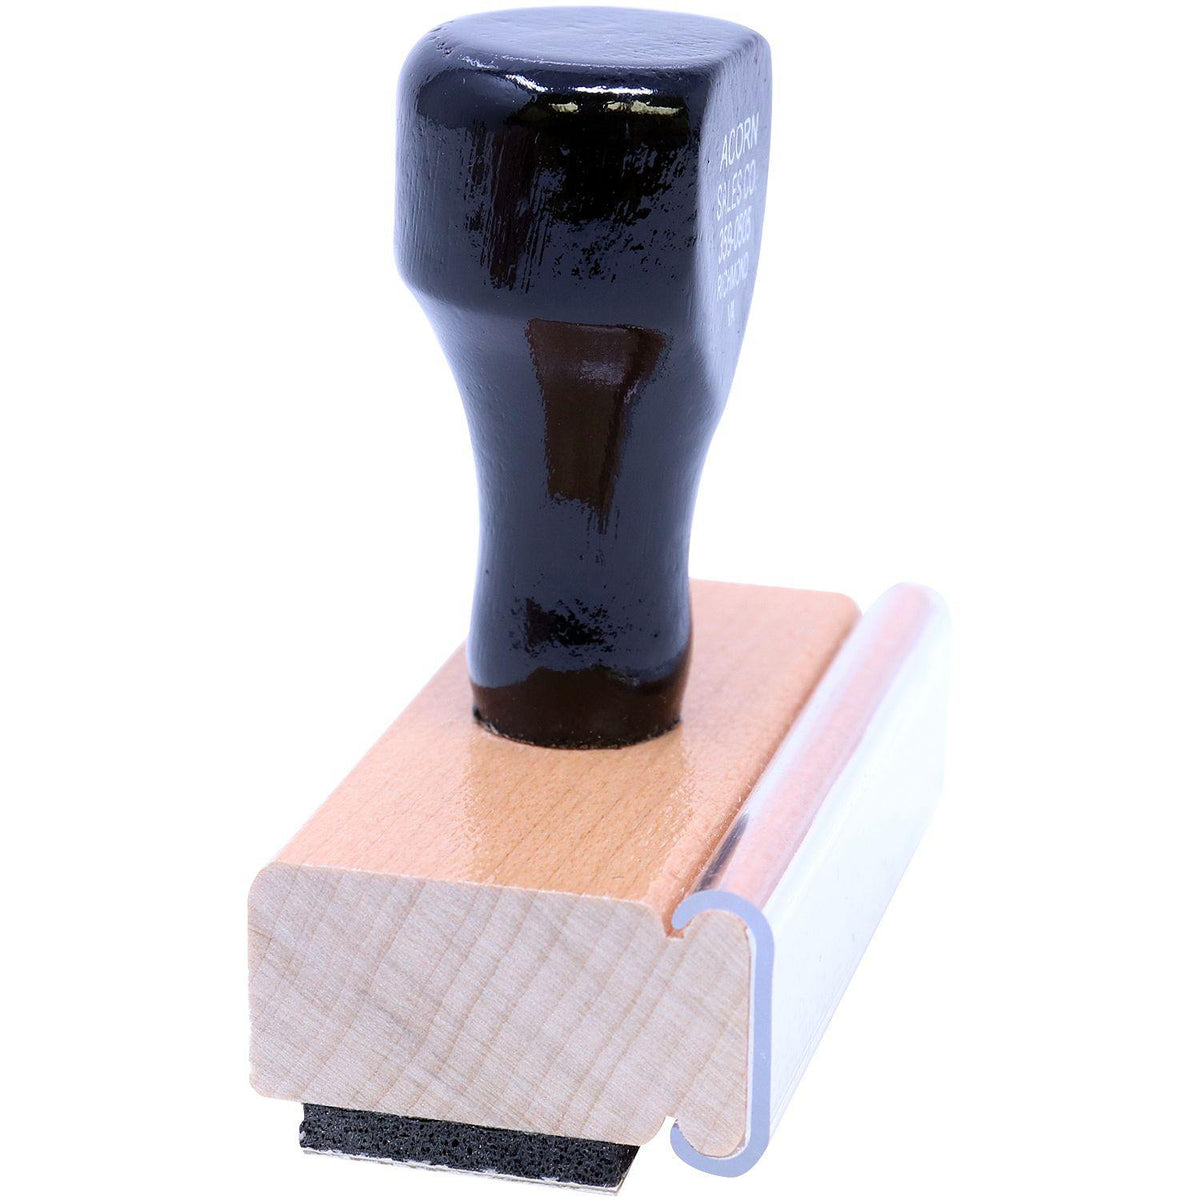 Side View of Large Bold COD Stamp Rubber Stamp at an Angle